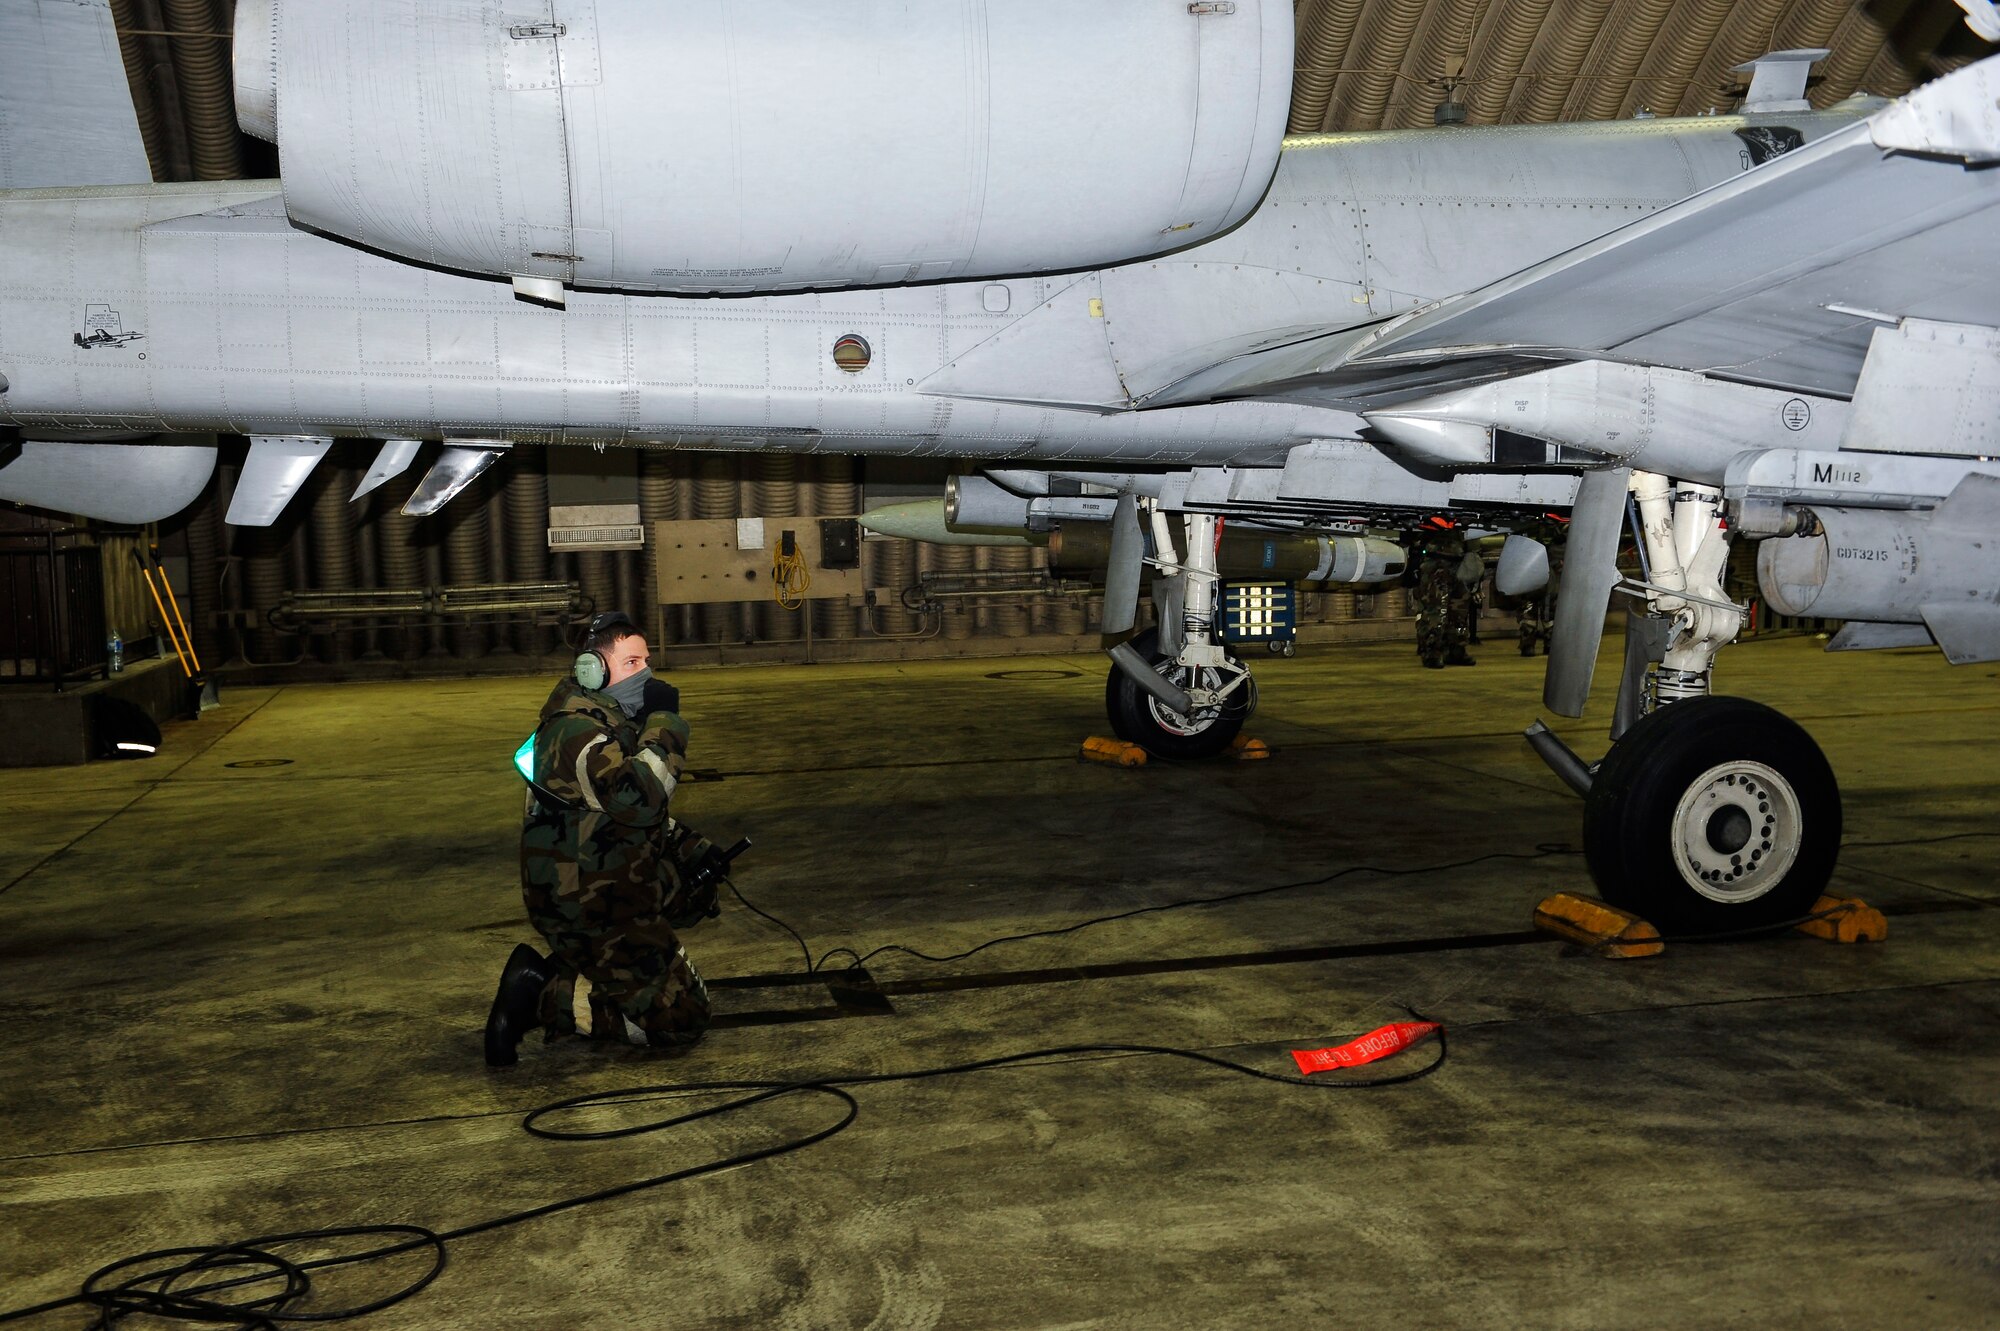 Senior Airman Brian Morrissey, 25th Aircraft Maintenance Unit dedicated crew chief, performs a pre-flight inspection of an A10 Thunderbolt II Dec. 5, 2014, during Exercise Beverly Bulldog 15-01 at Osan Air Base, Republic of Korea. The exercise focuses on readiness, testing Osan’s wartime procedures, and realistically looking at our ability to defend the base, execute operations and receive follow-on forces. (U.S. Air Force photo by Senior Airman David Owsianka)